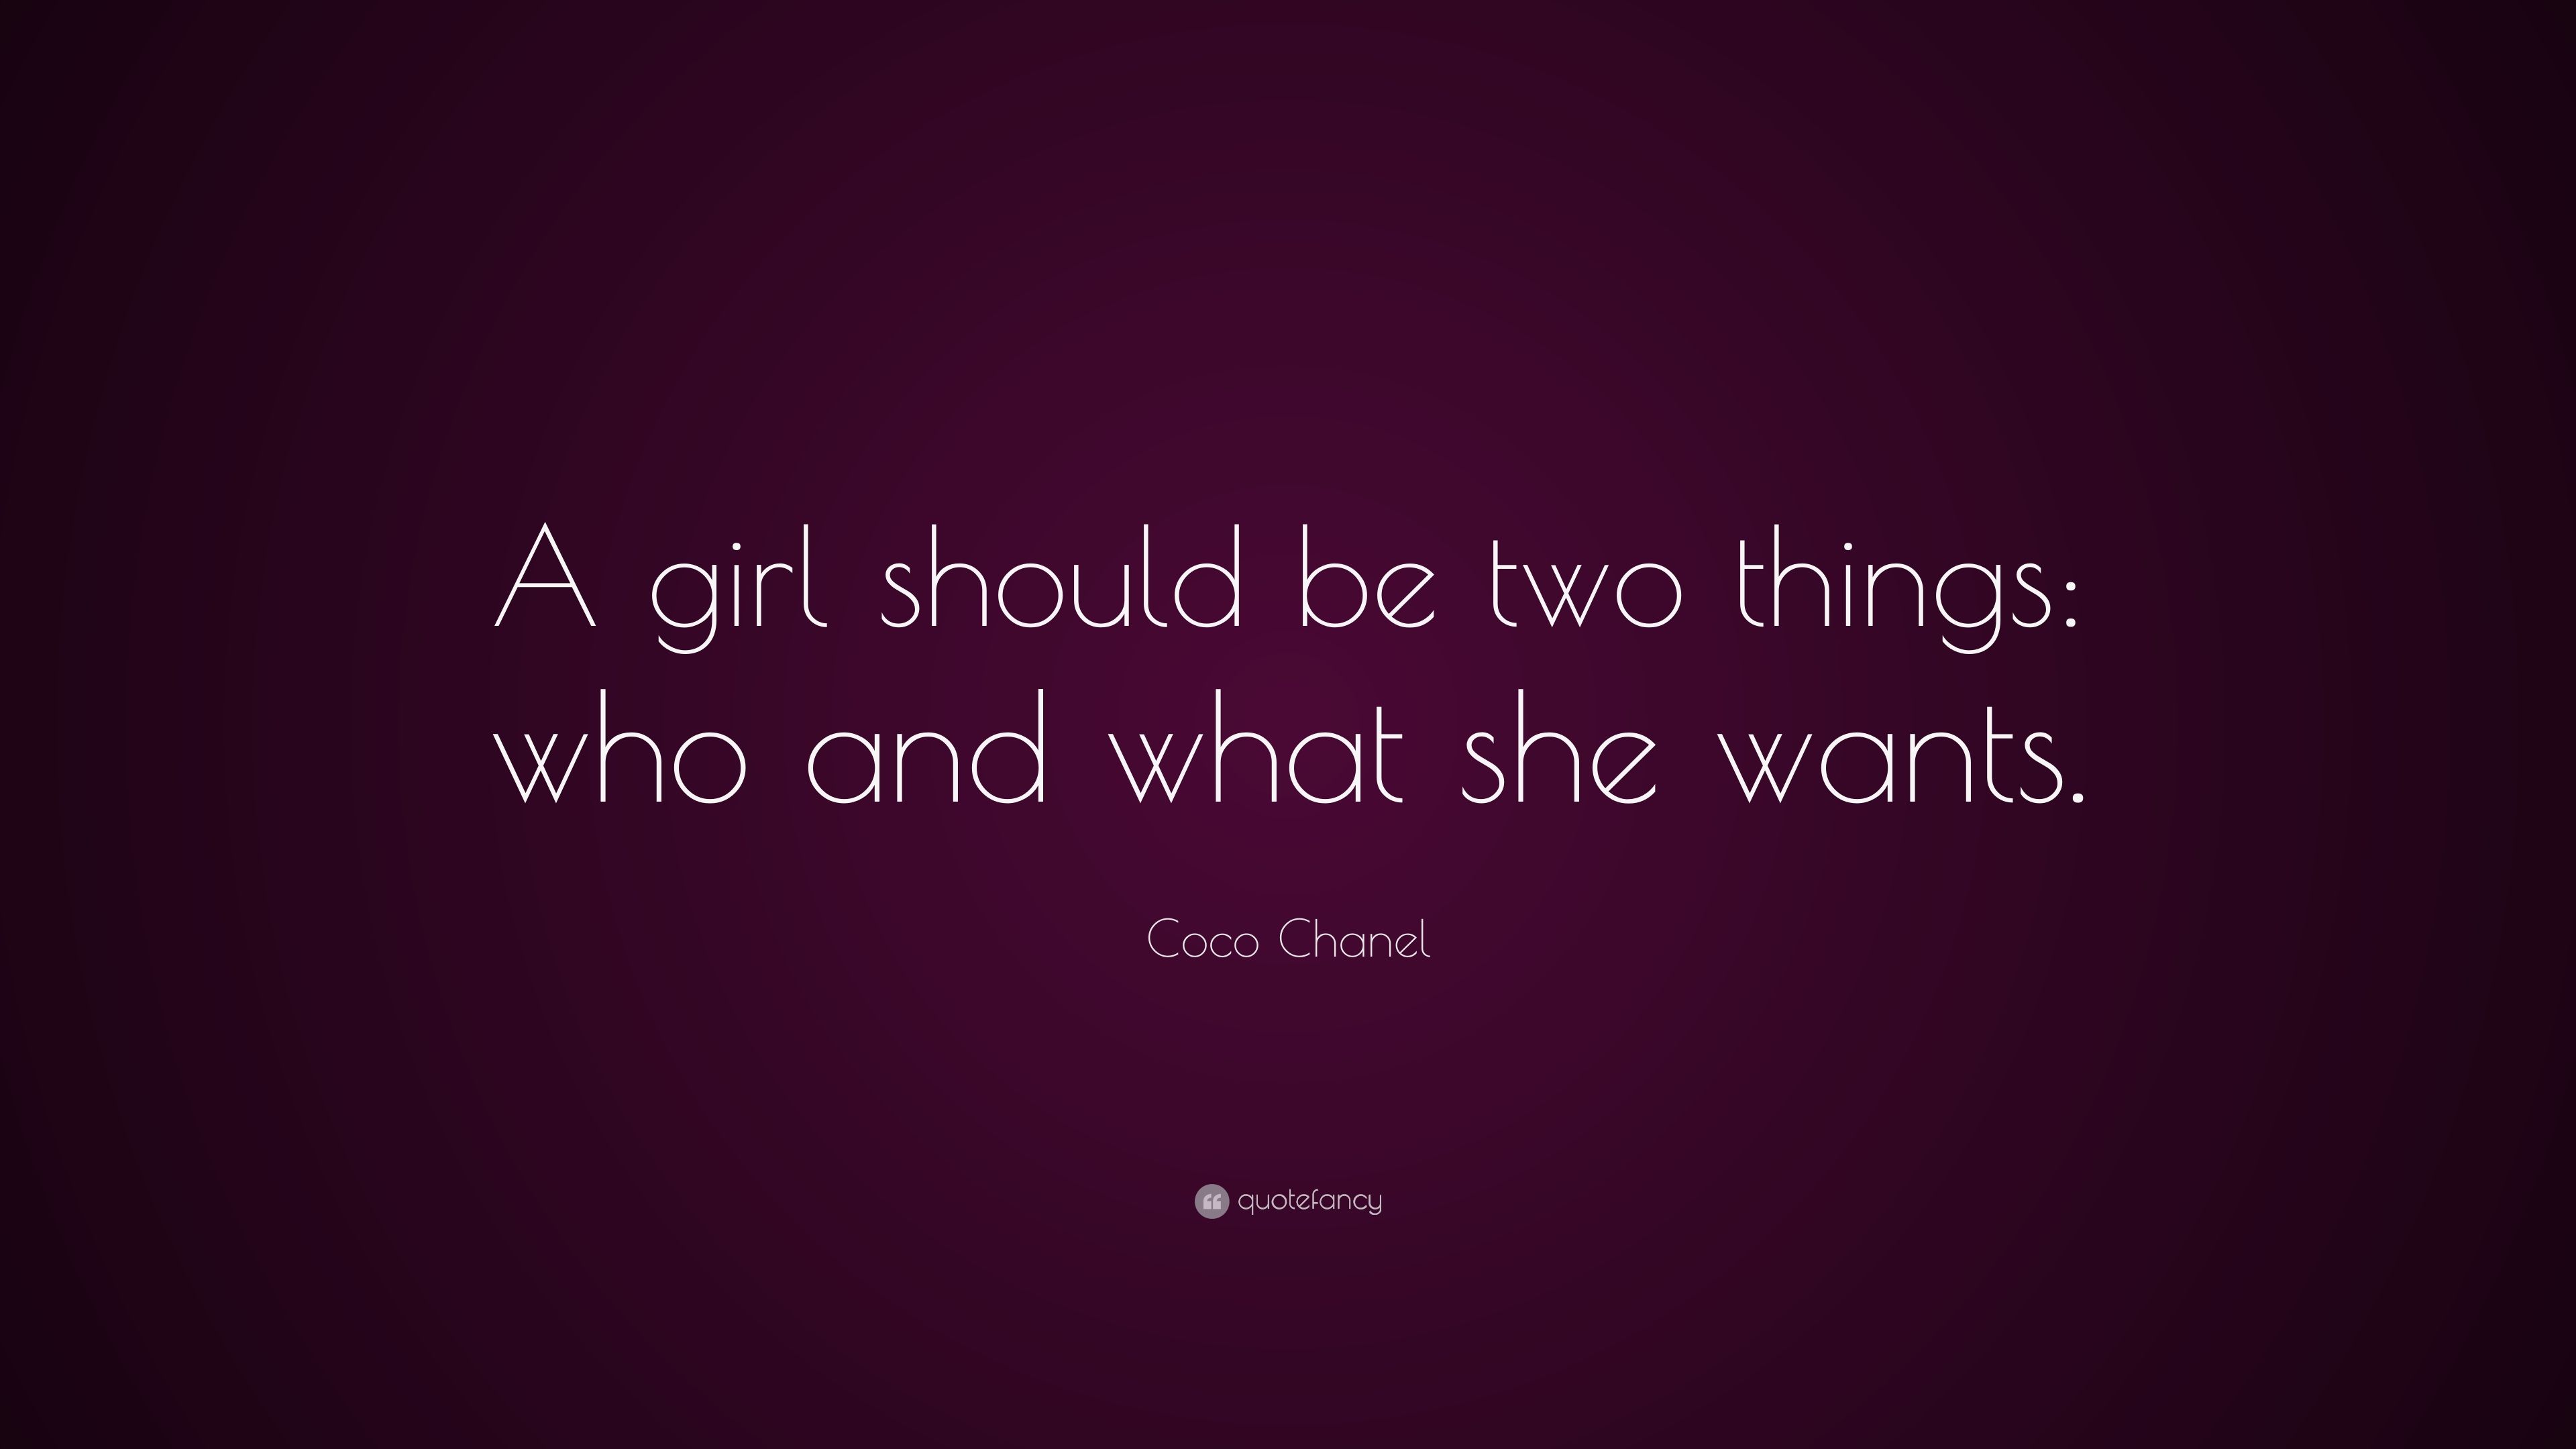 Coco Chanel Quotes 22 wallpapers - Quotefancy